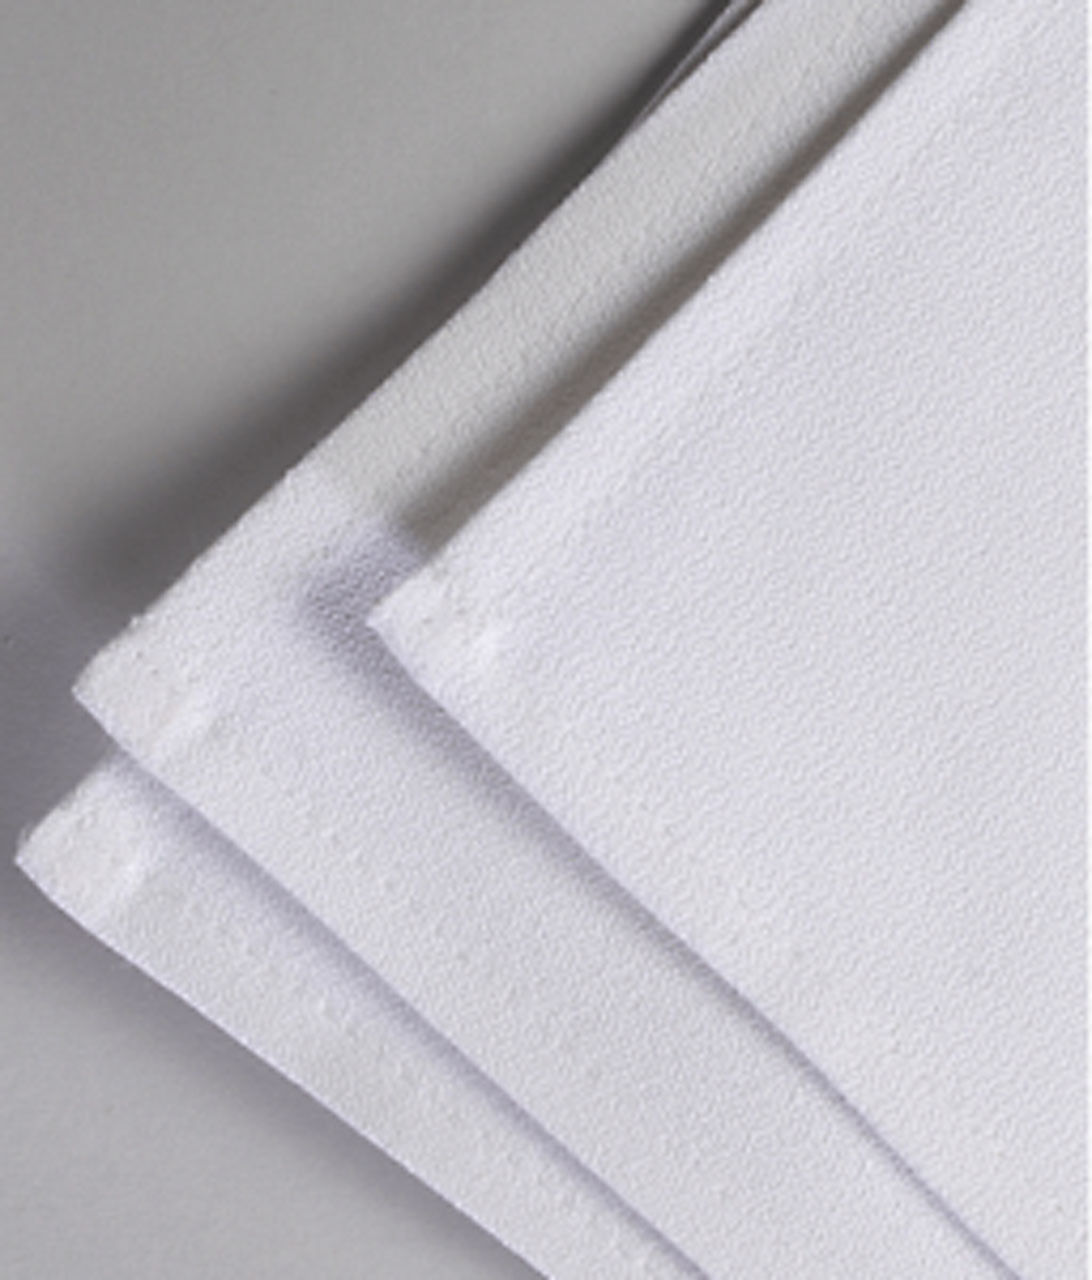 What is the weave style of the Cotton Momie Square Table Linens?